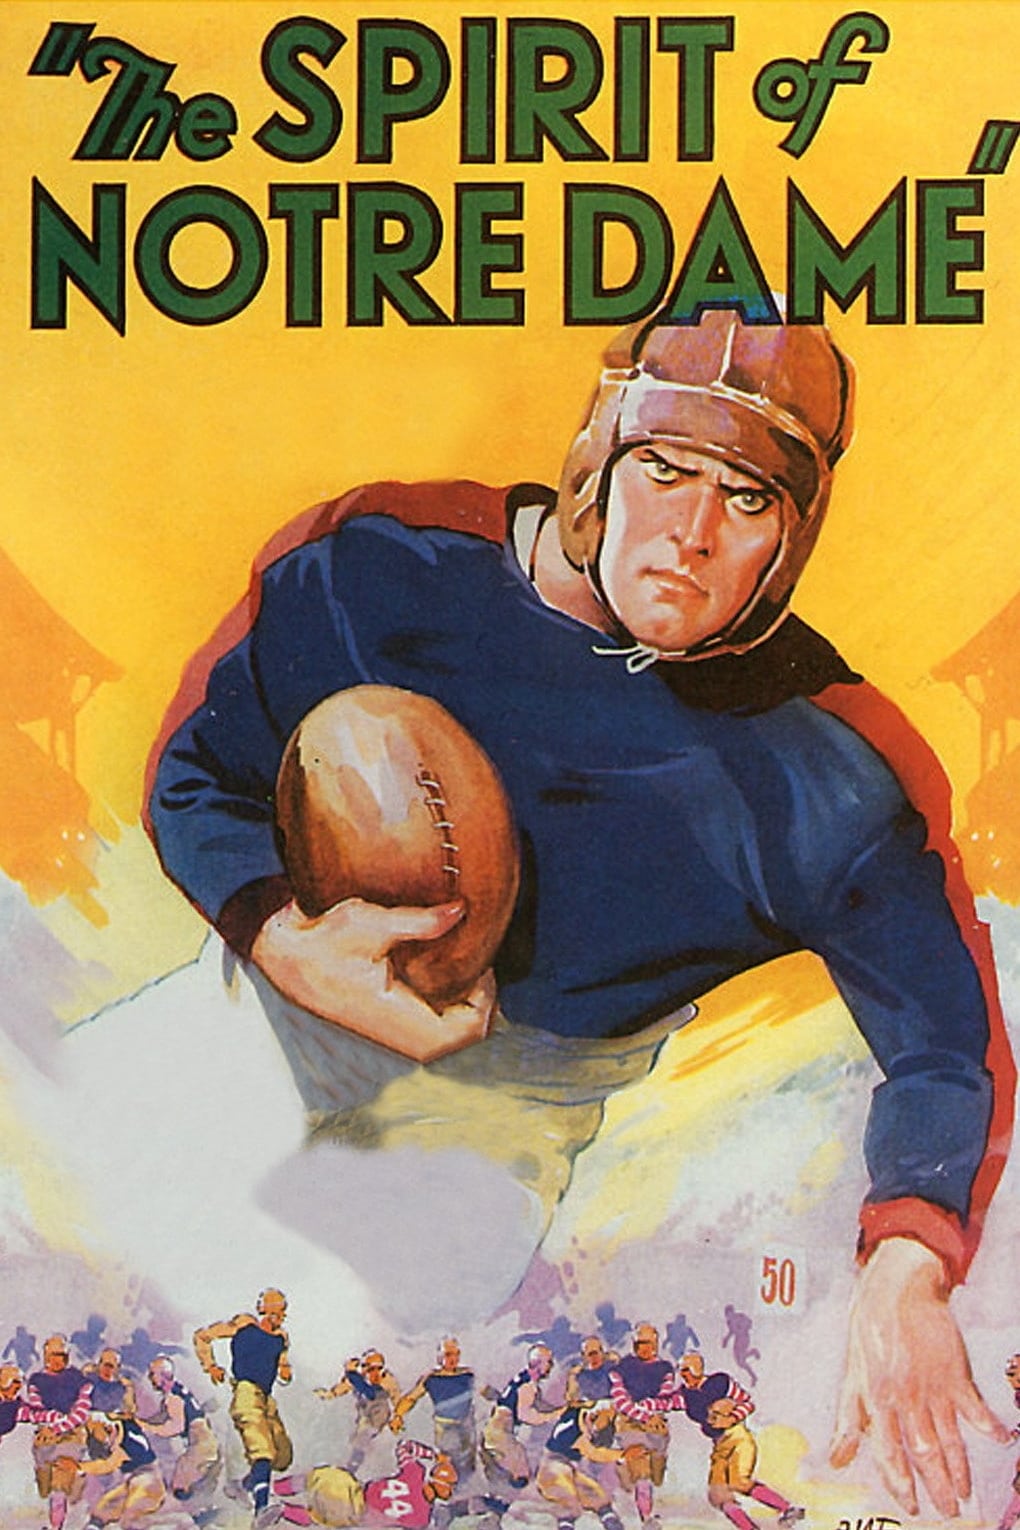 The Spirit of Notre Dame